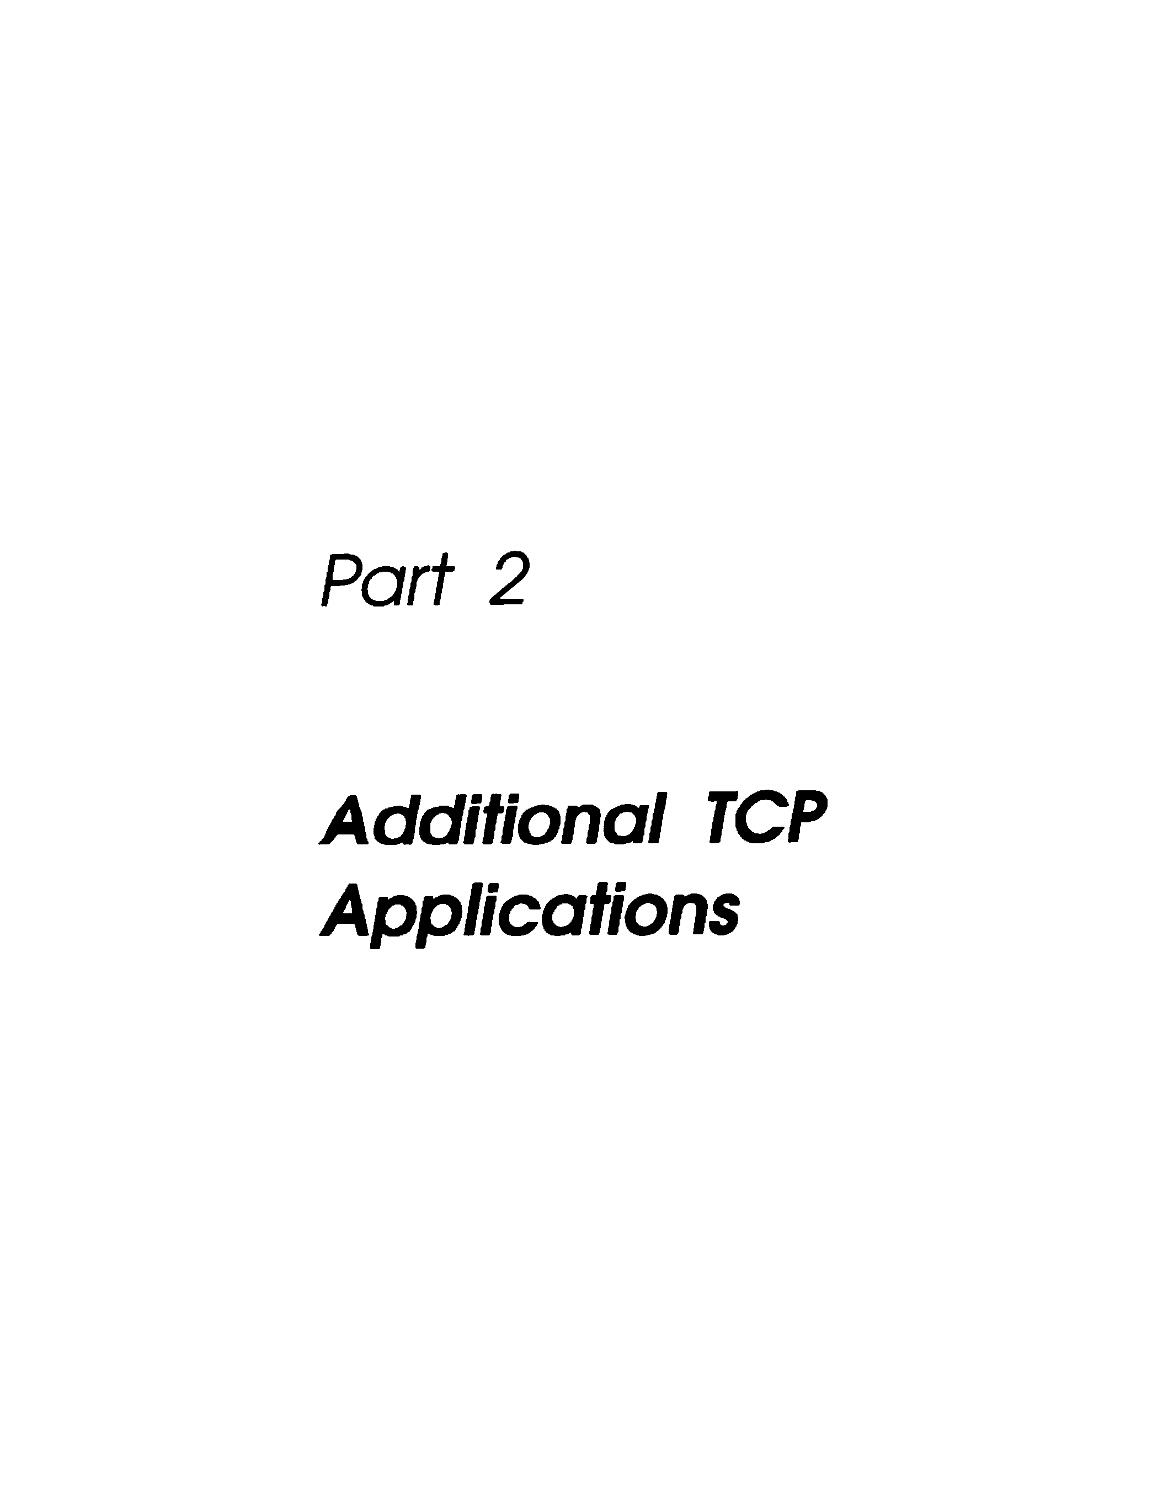 Part 2. Additional TCP Applications